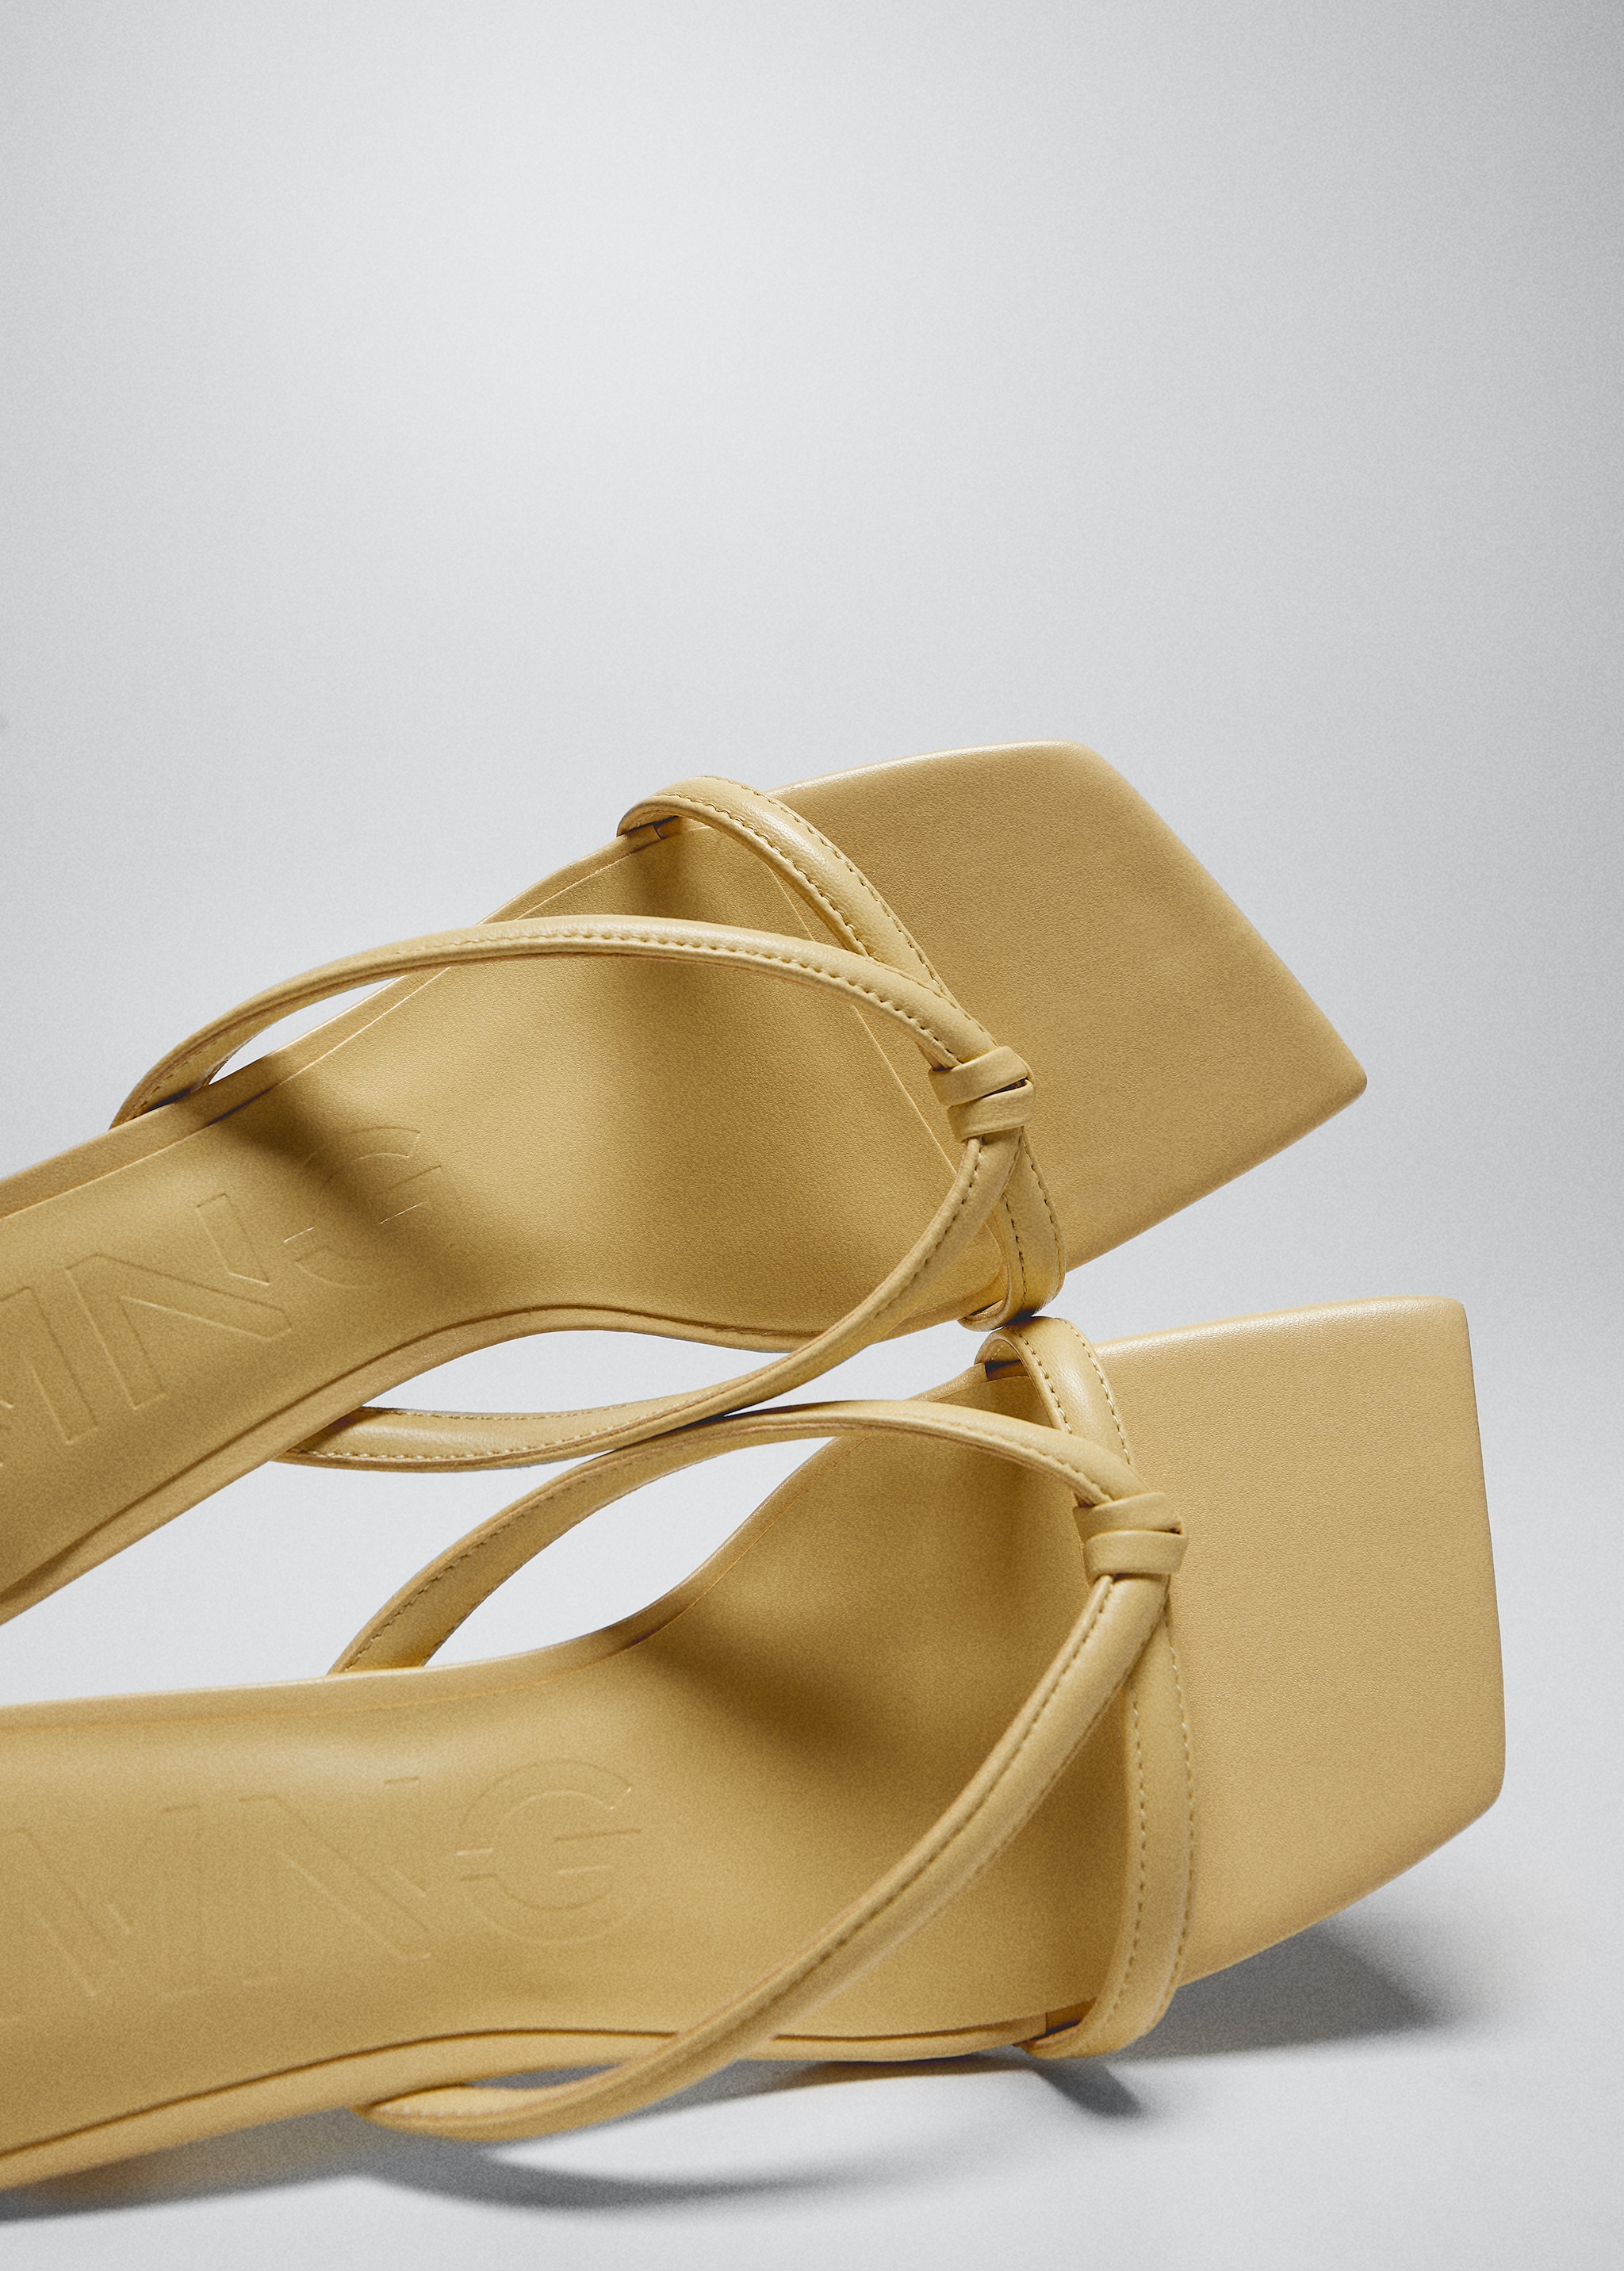 Structured leather sandals - Details of the article 3